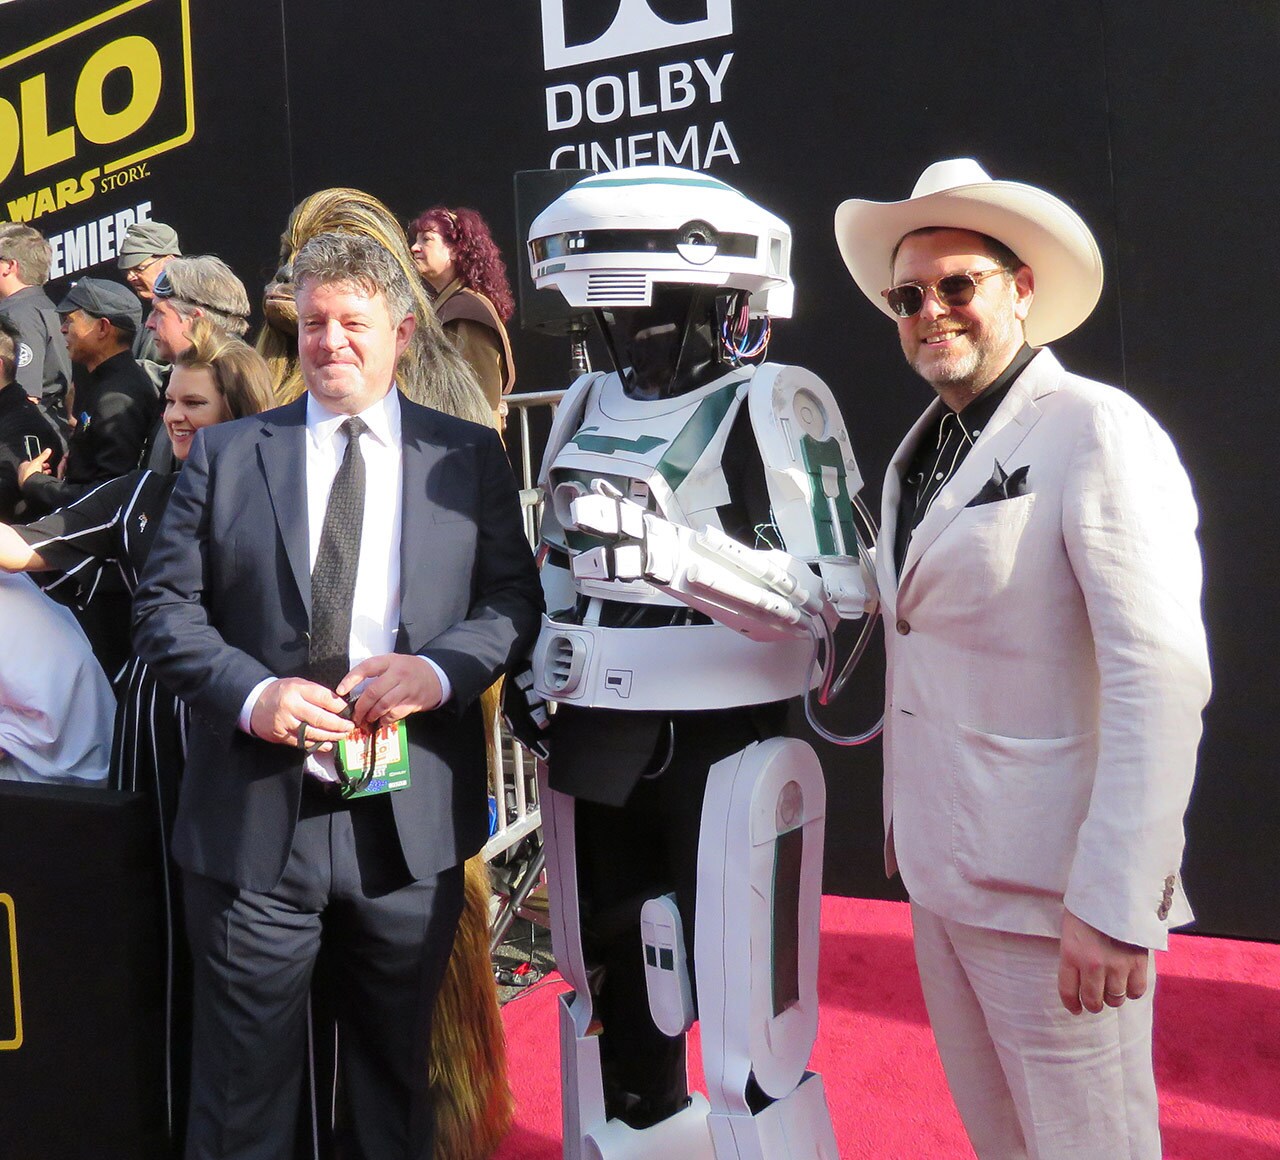 Costume designers David Crossman, left, and Glyn Dillon, right, stop to pose with cosplayer Darren Moser, dressed as L3-37, during the world premiere of <em>Solo: A Star Wars Story</em>.